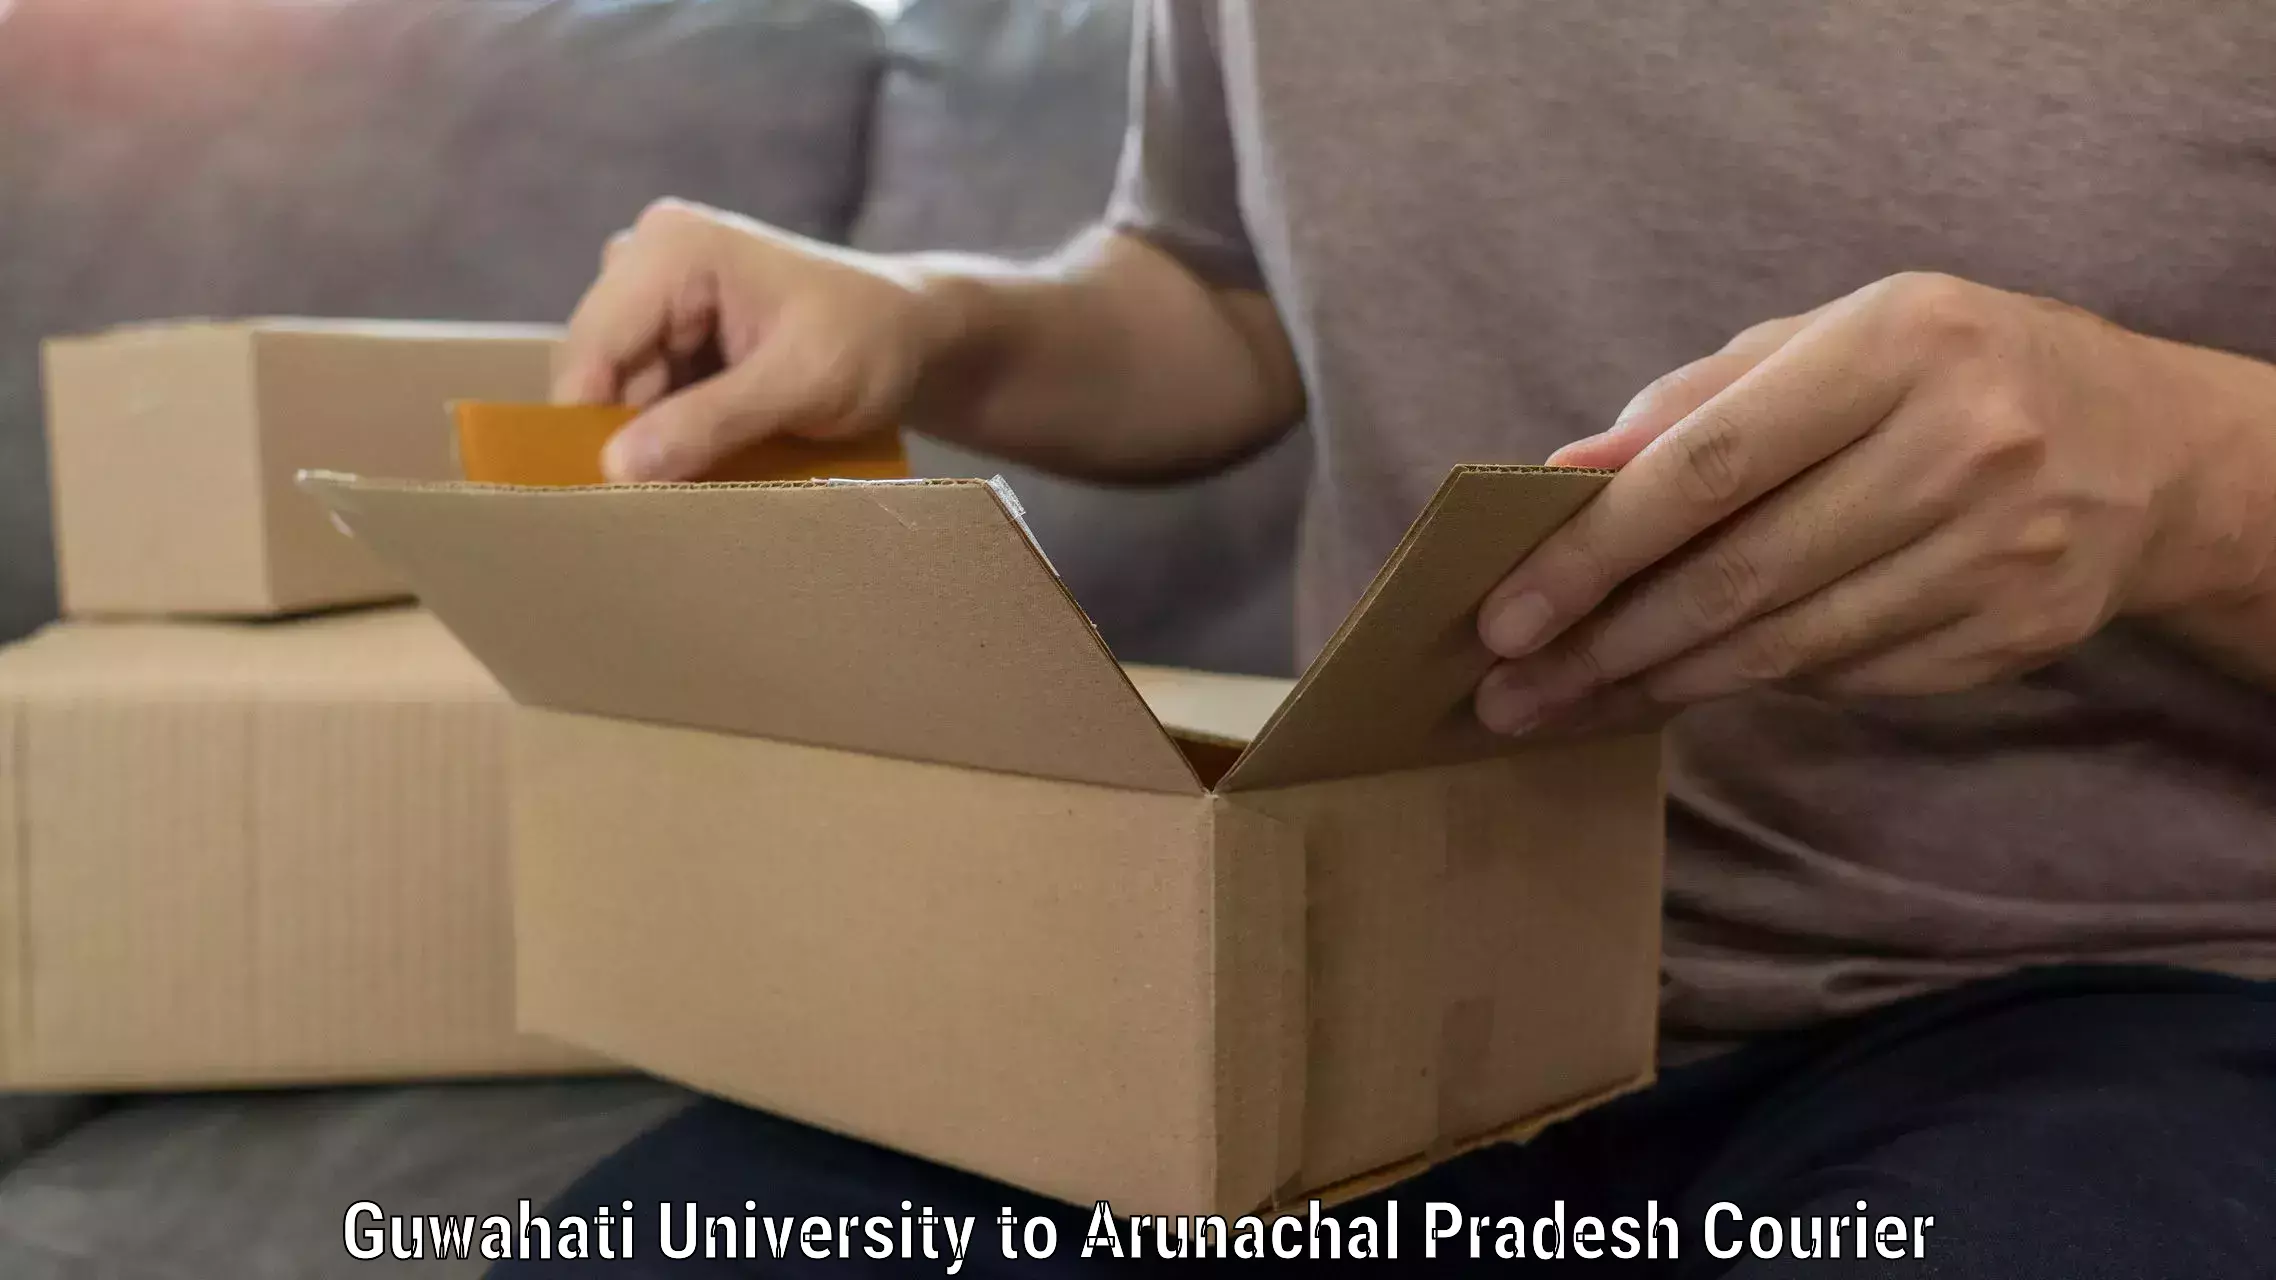 Packing and moving services Guwahati University to Dirang